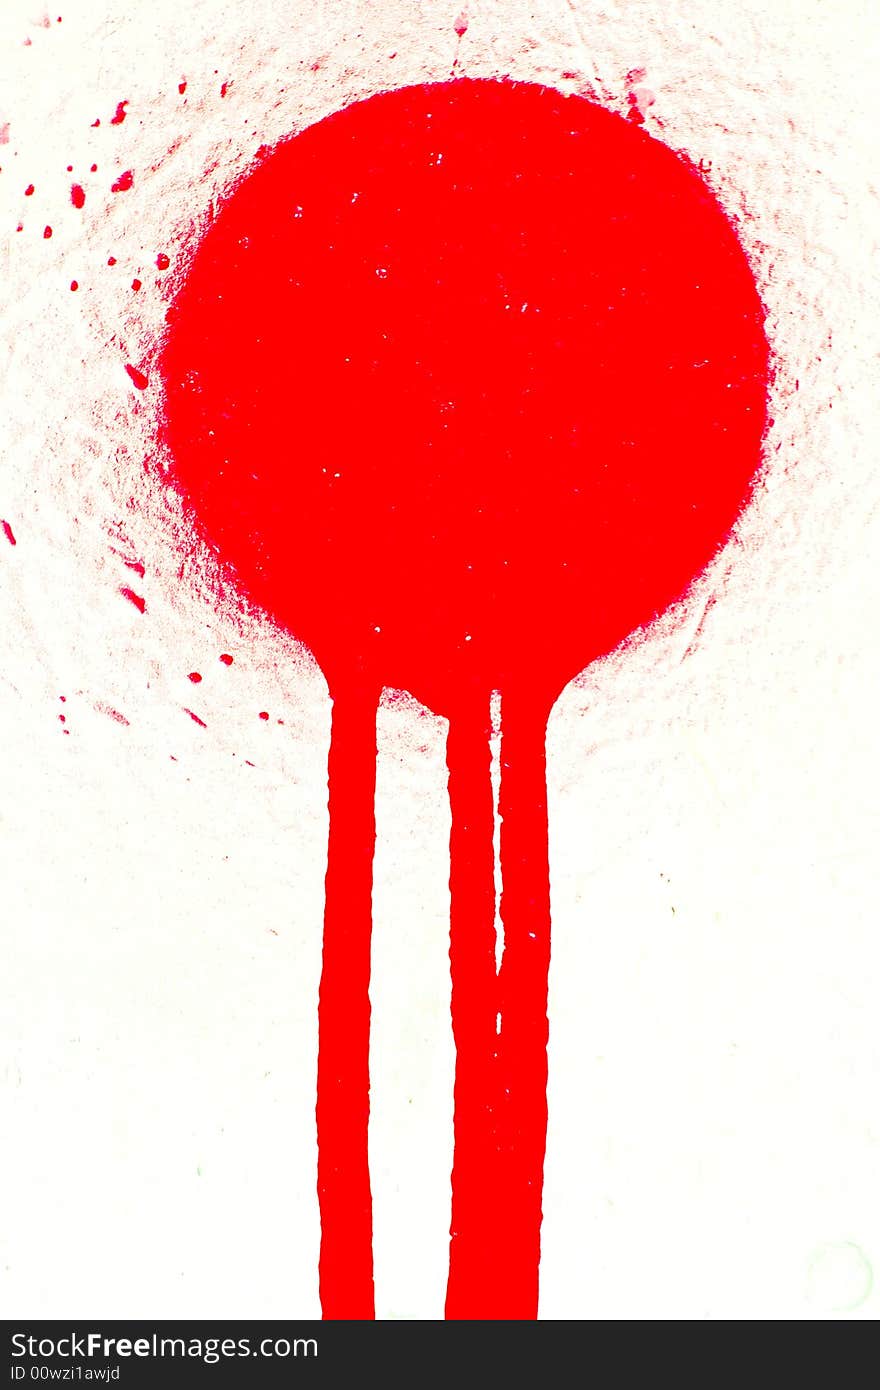 Red sprayed paint stain on white background